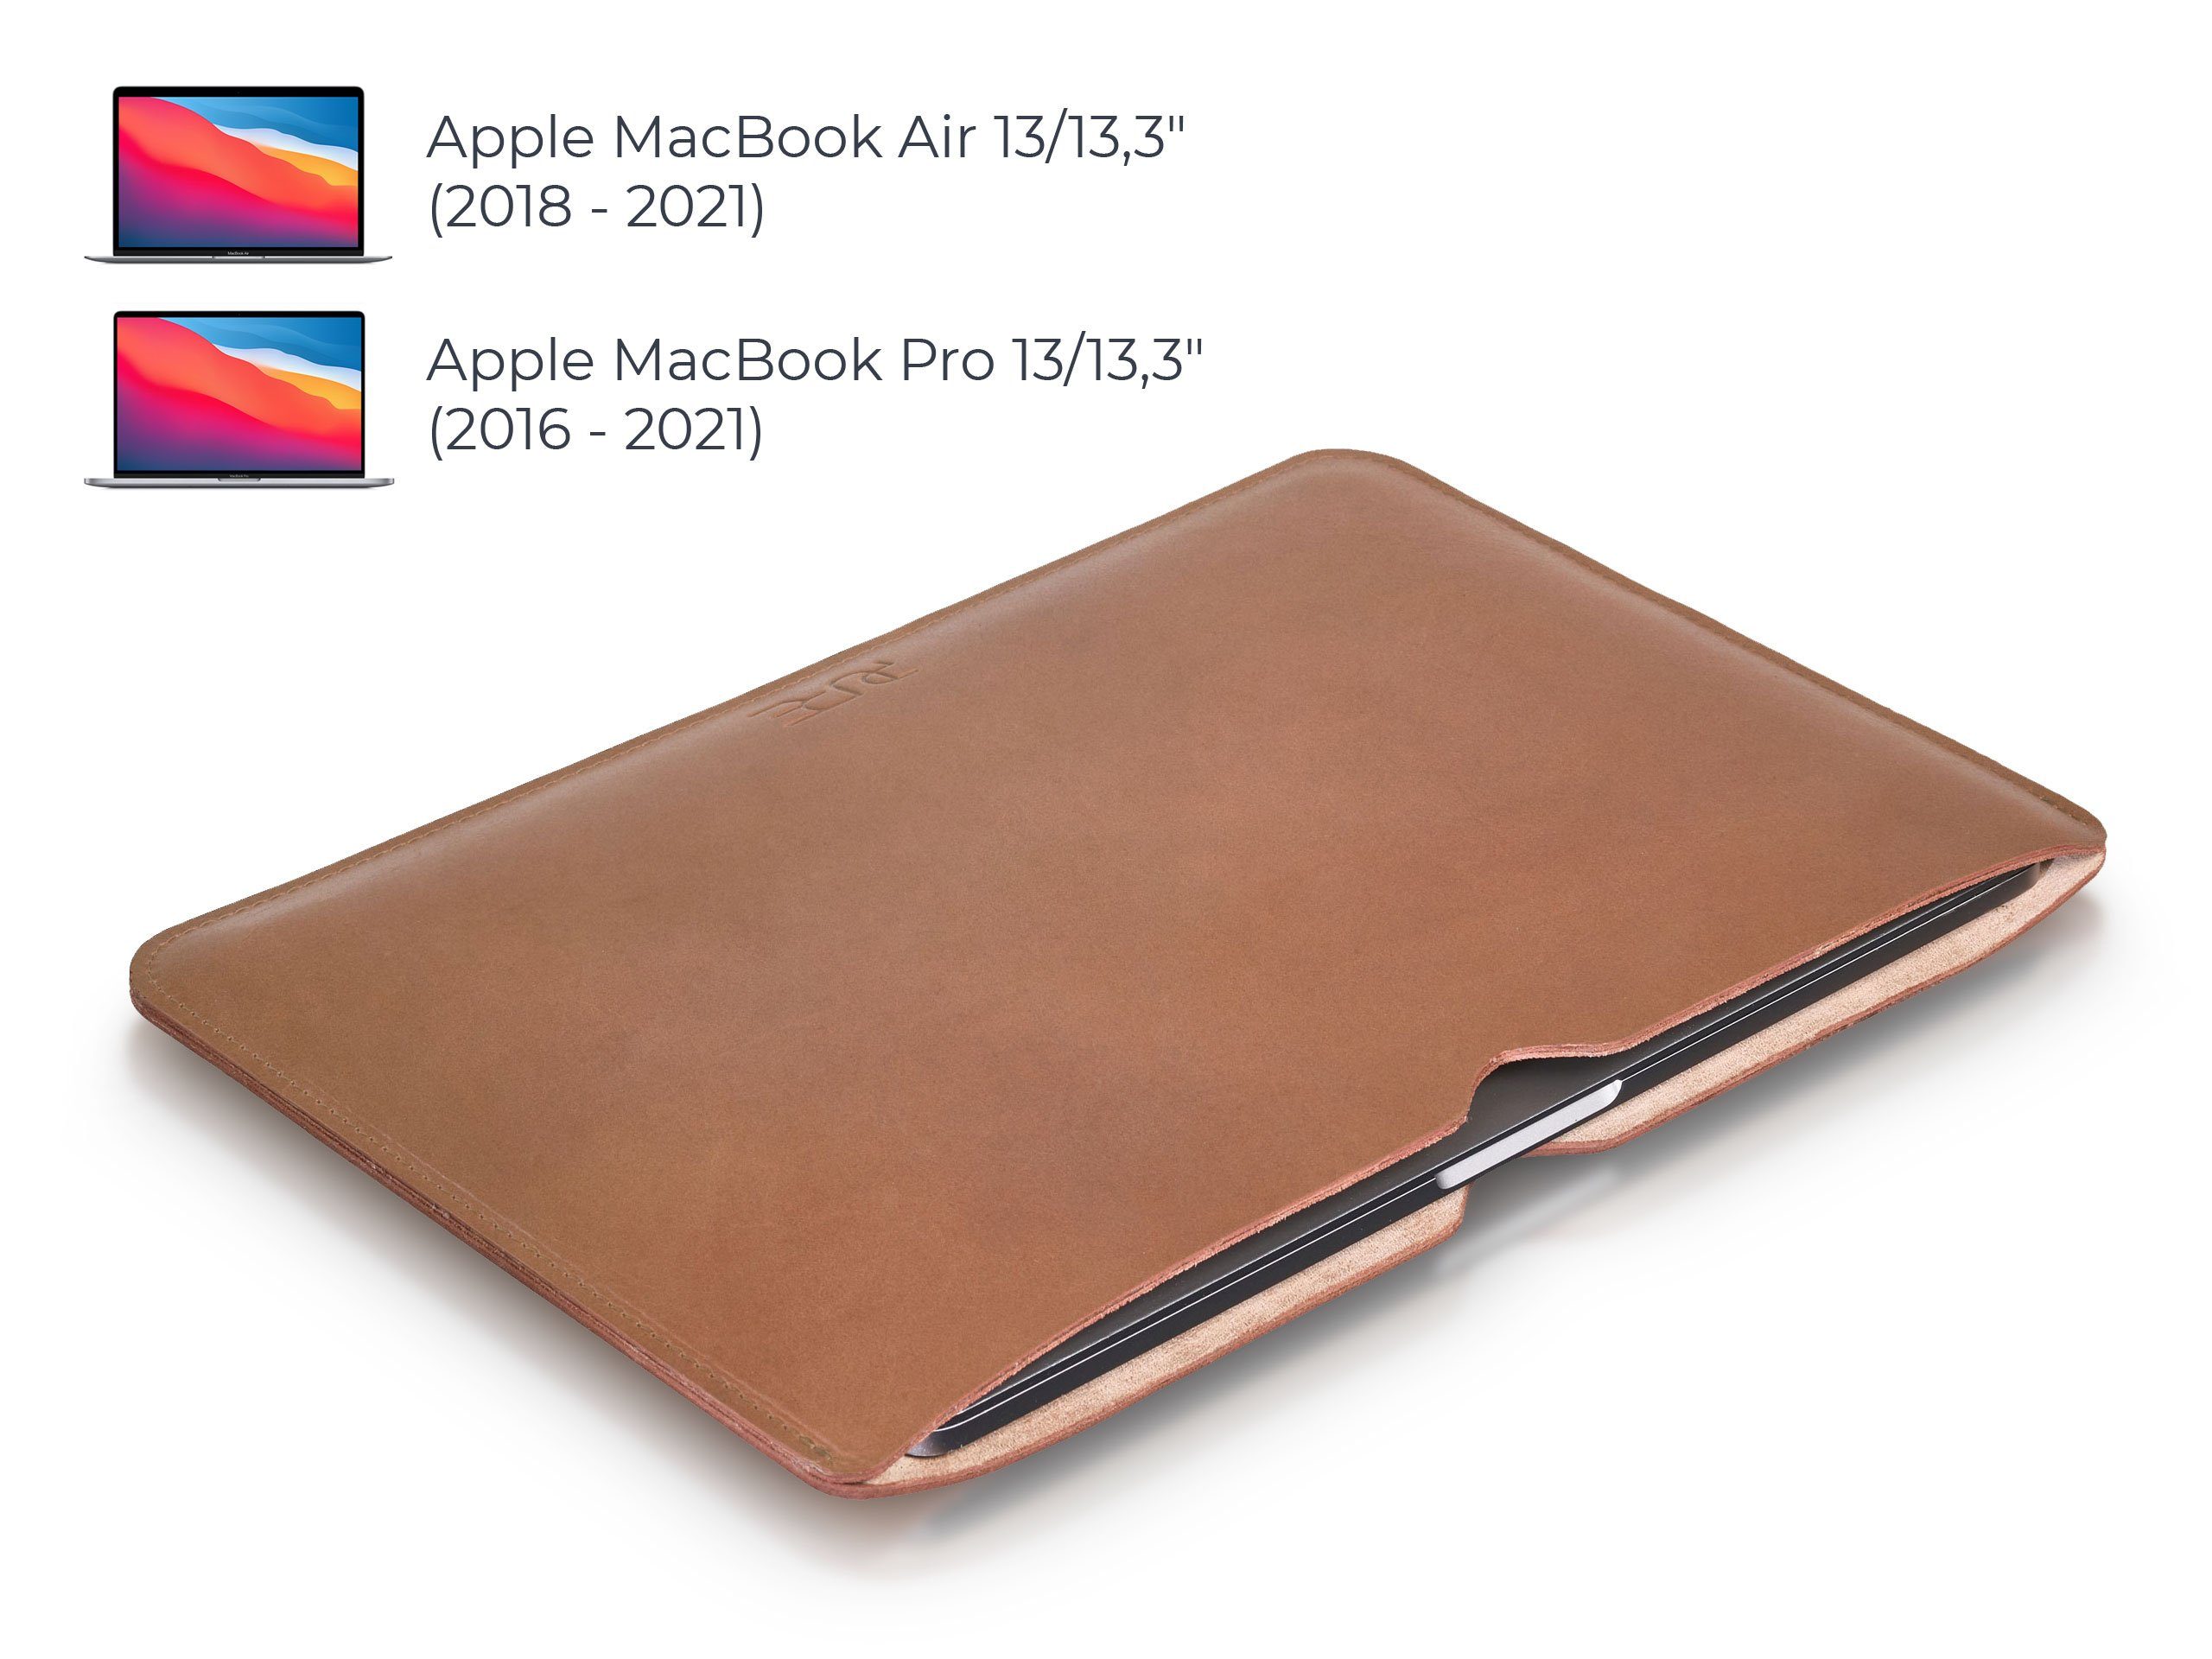 PURE Leather Studio Laptop-Hülle 13 Zoll MacBook Hülle AVIOR 33,8 cm (13,3 Zoll), Laptop-Hülle für Apple MacBook Air/Pro 13 Zoll Sleeve Cover Case